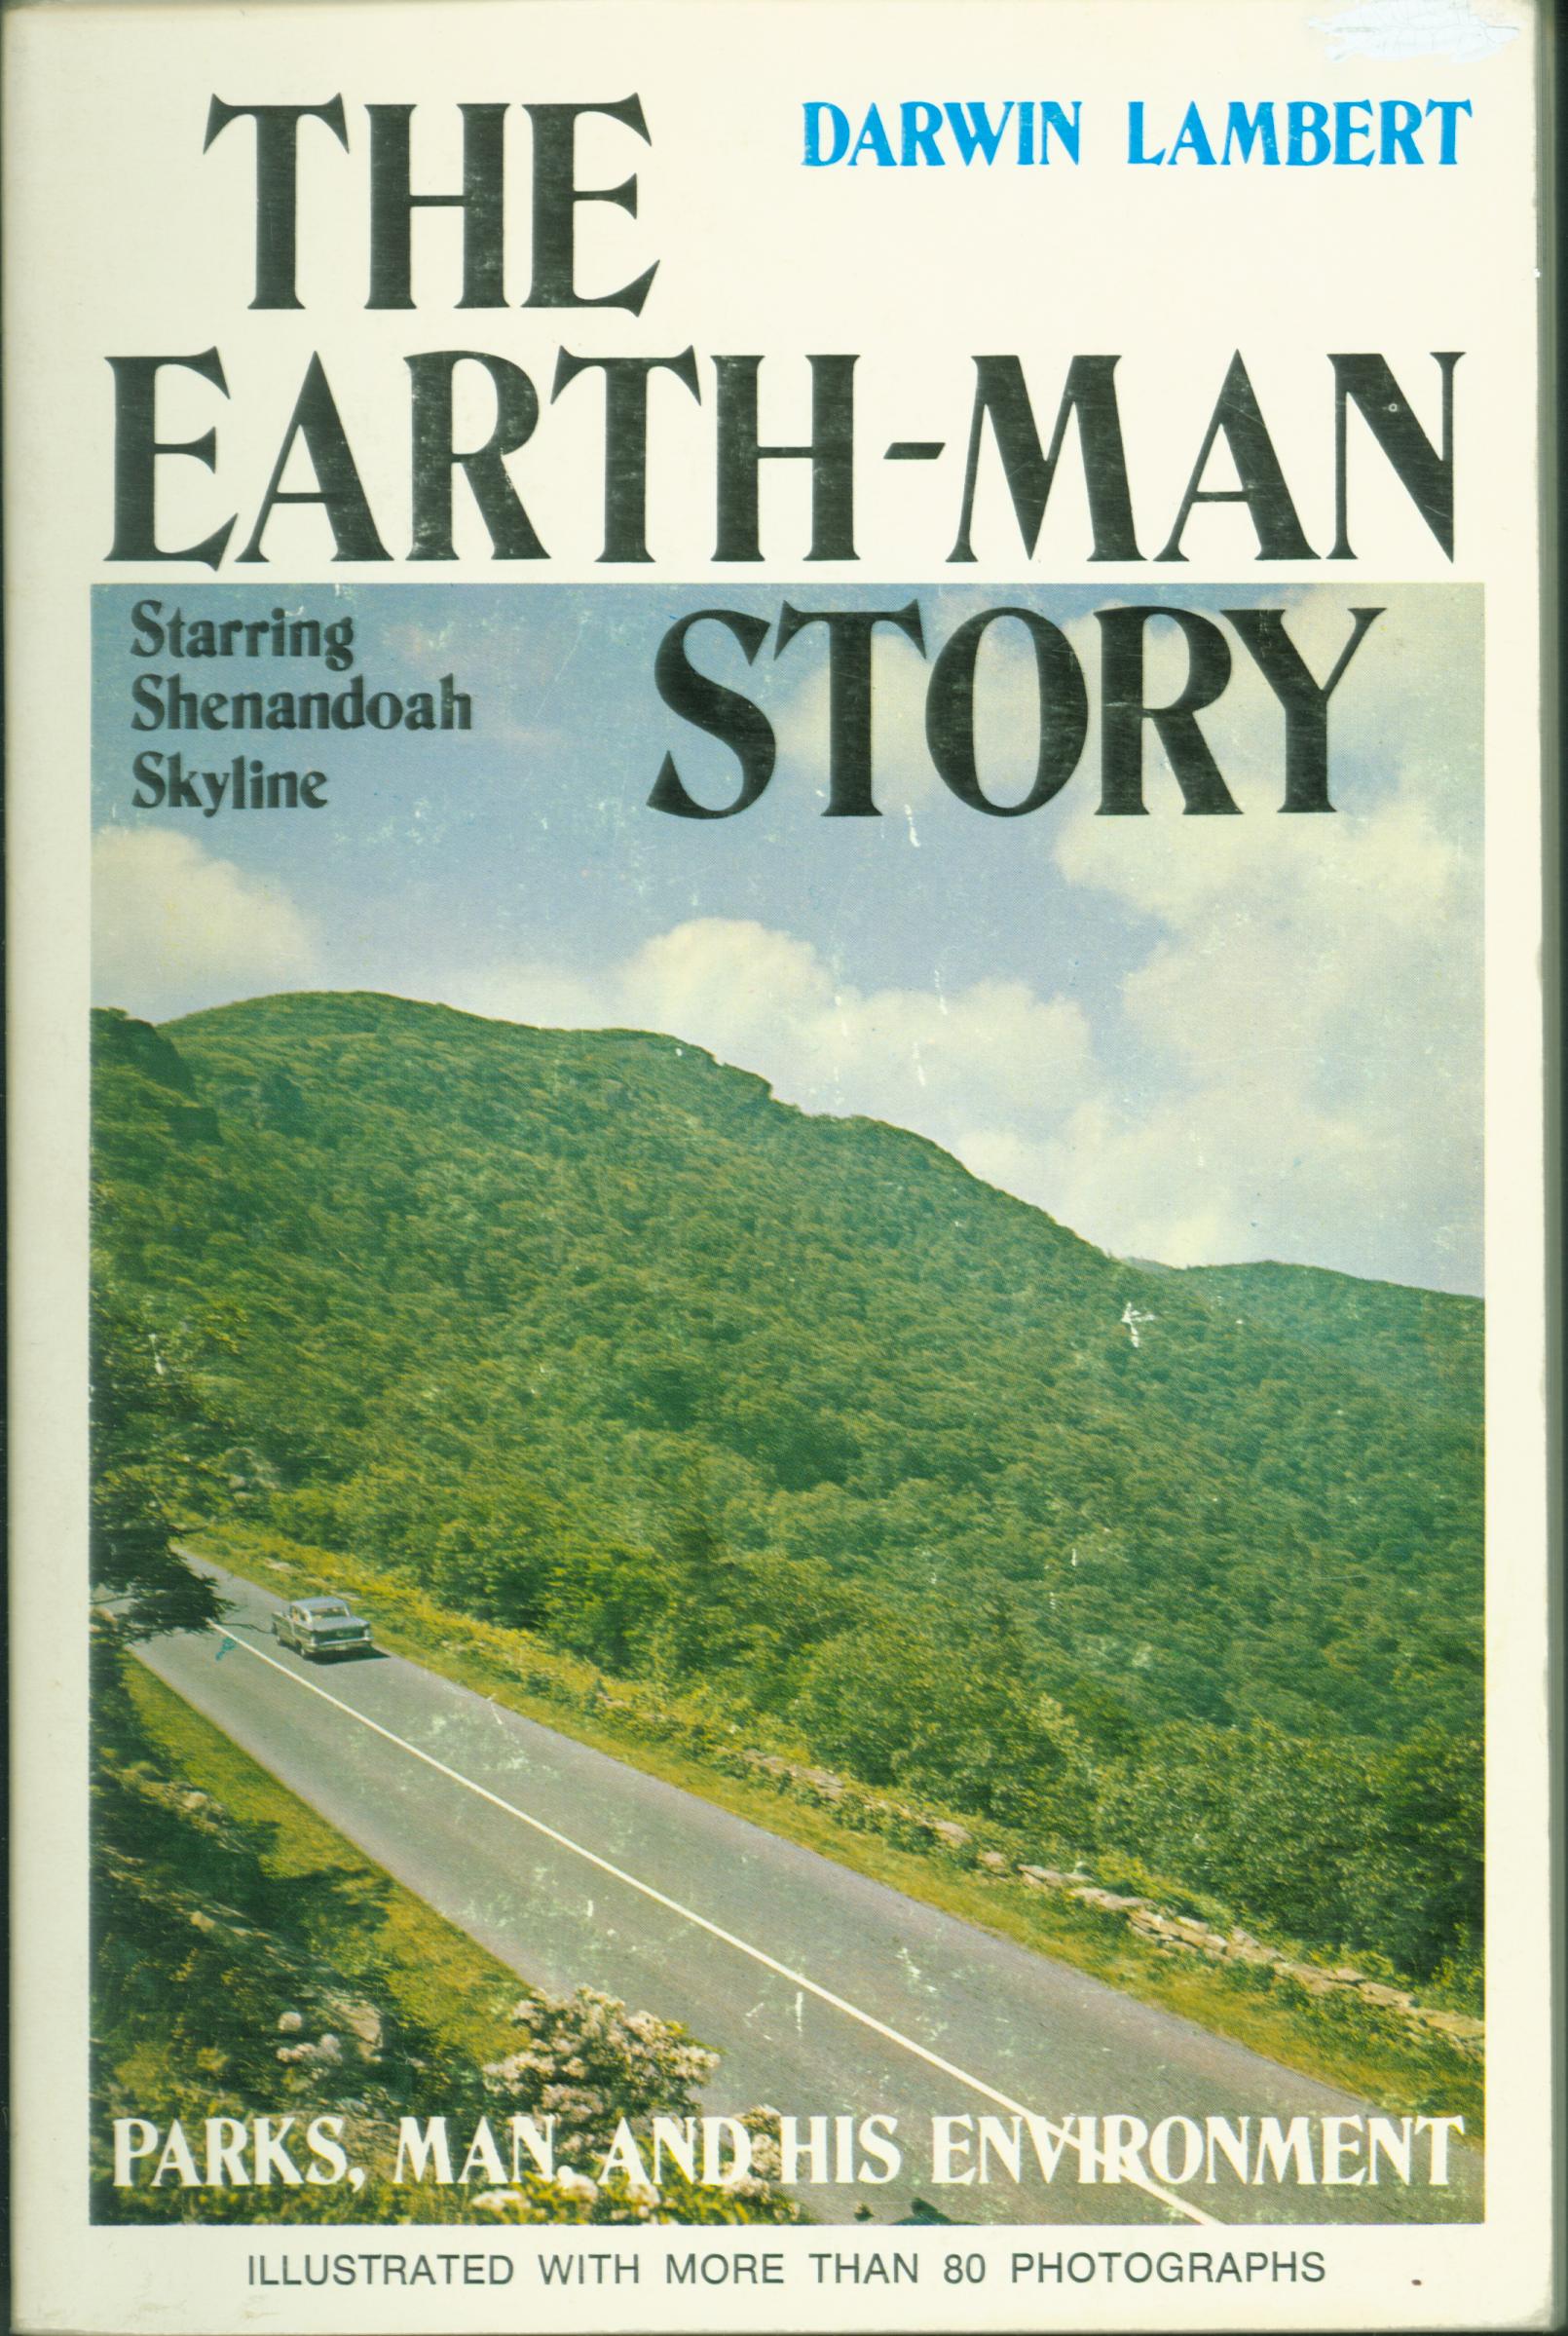 THE EARTH-MAN STORY: starring Shenandoah Skyline--parks, man, and his environment. 